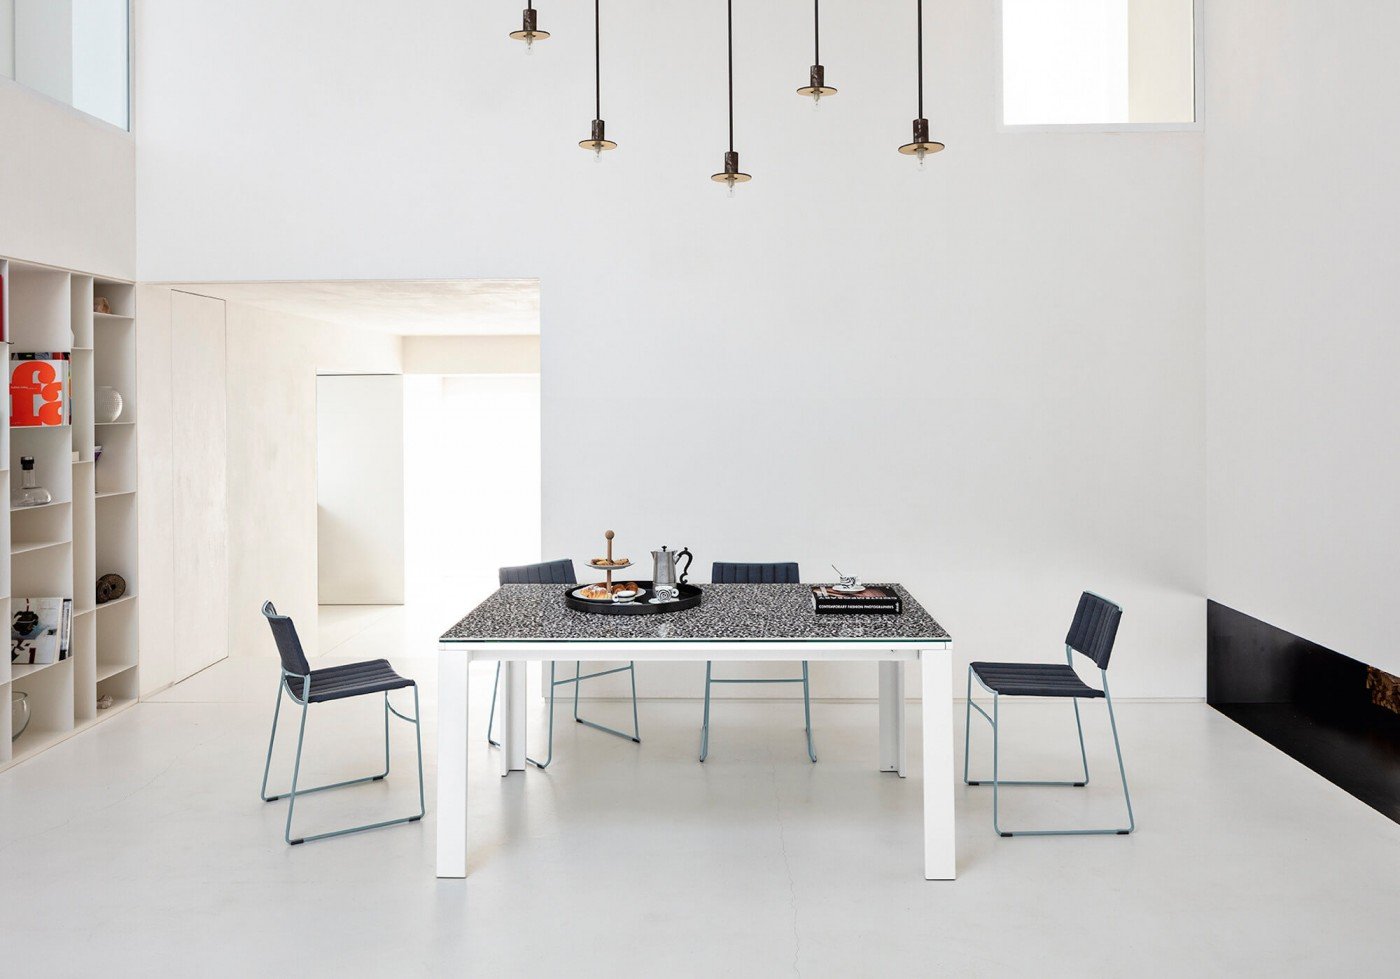 Marcopolo Extendable Table dining from Midj, designed by Paolo Vernier